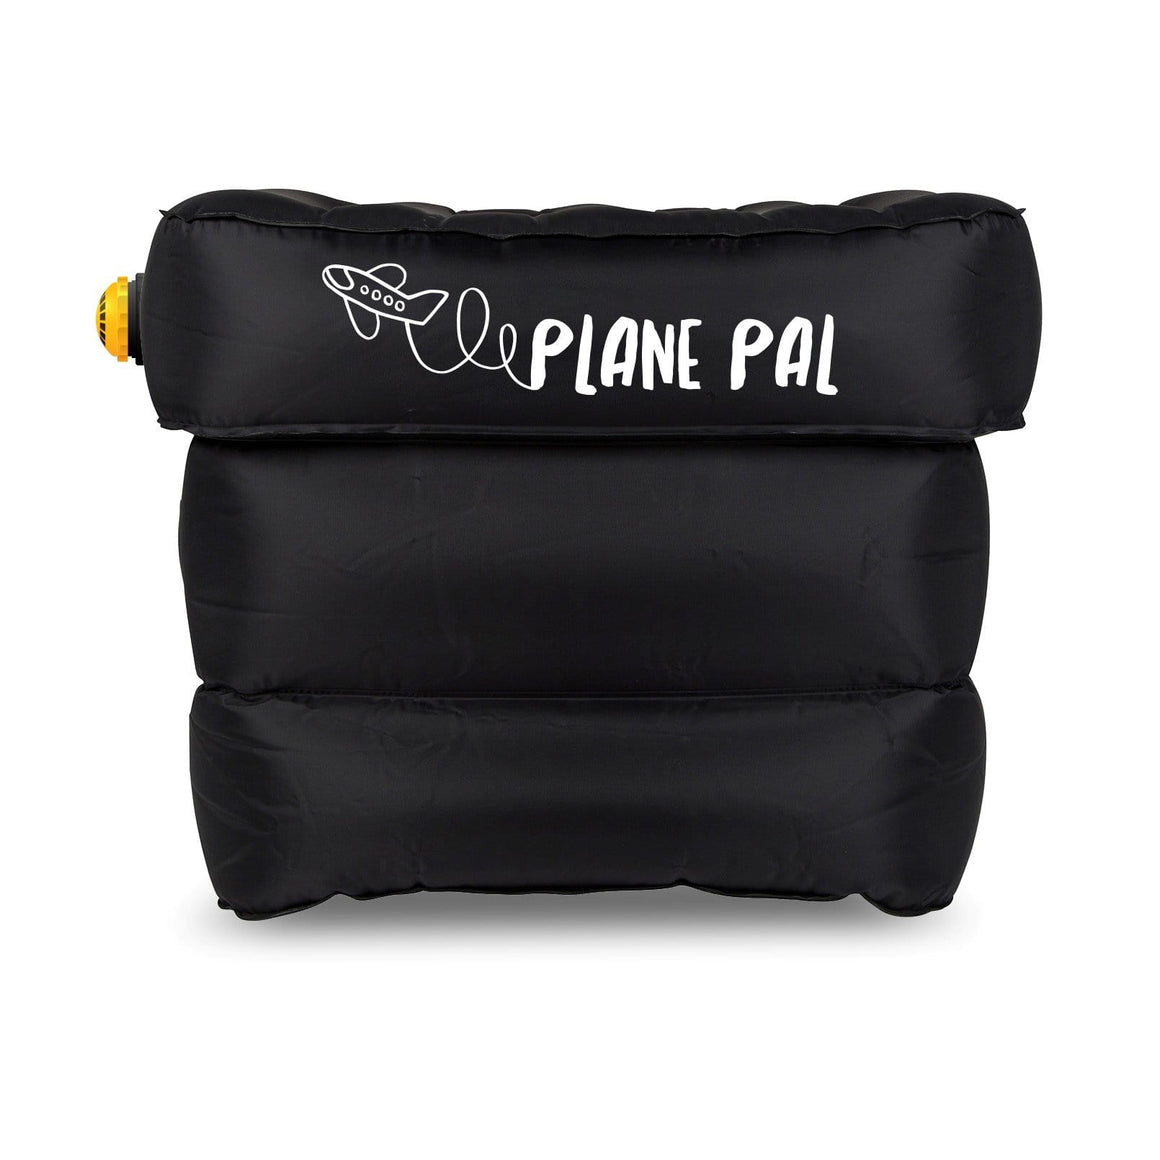 Plane Pal - Additional Pillow Only (No Pump)